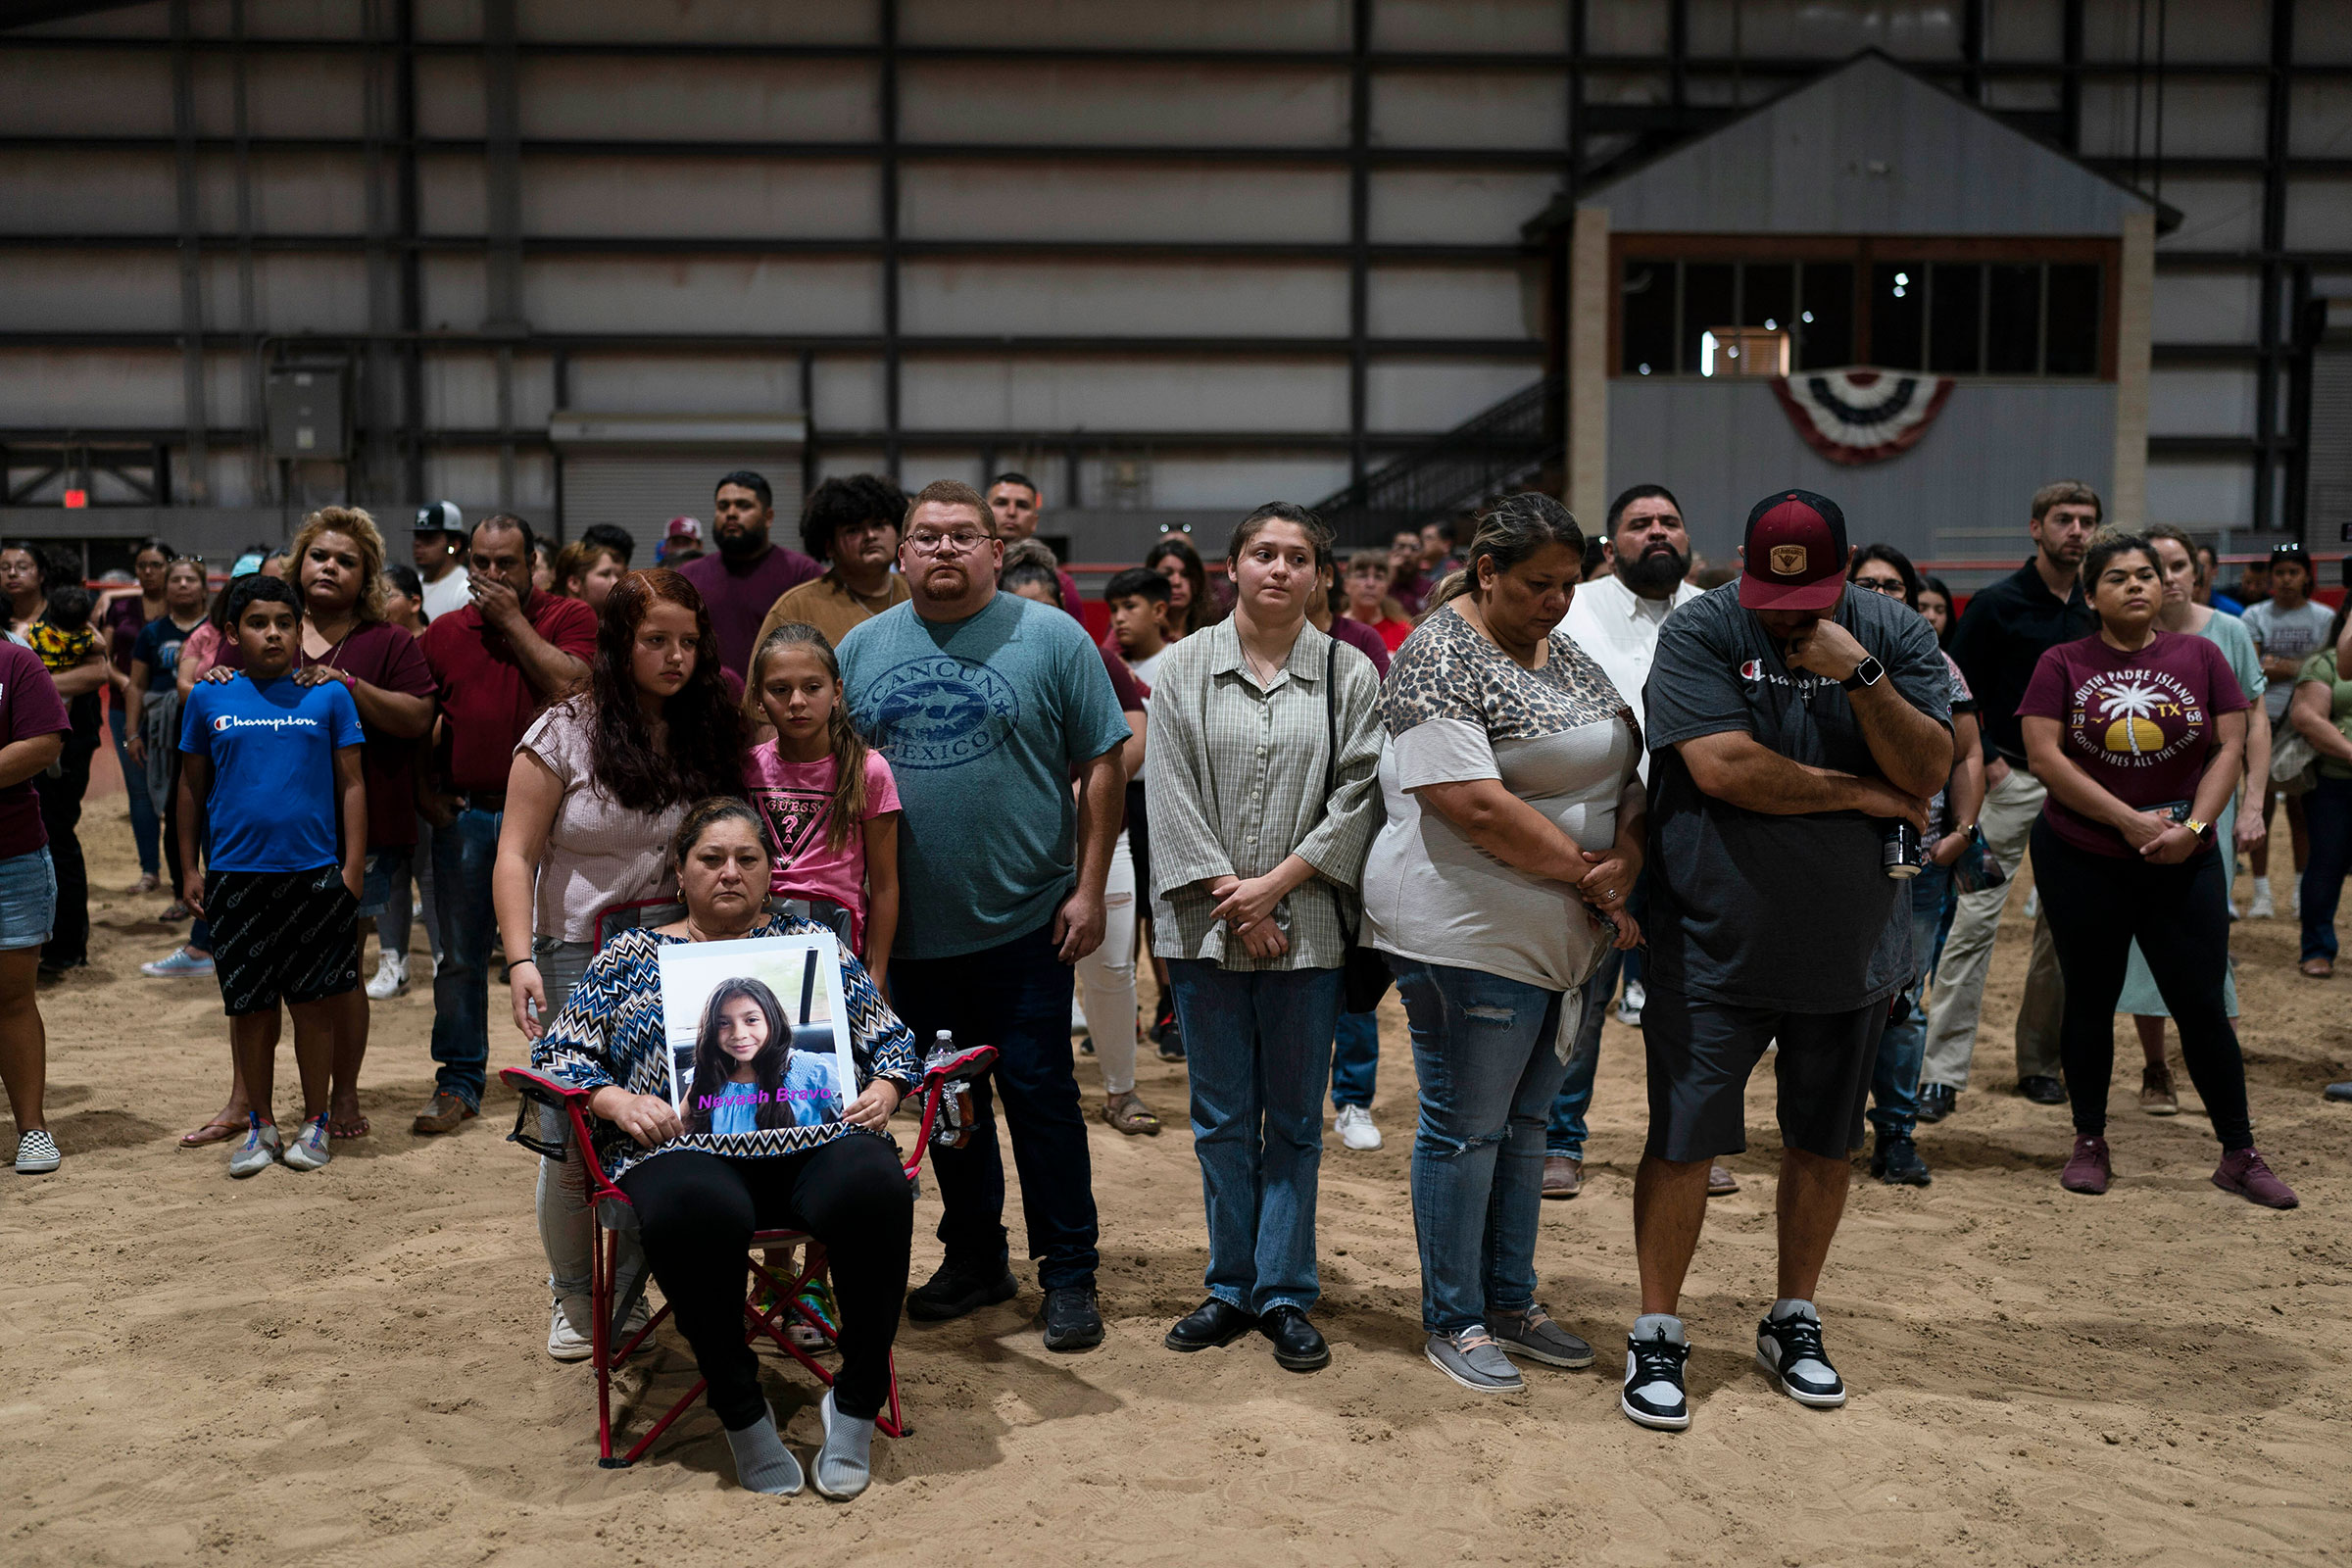 Family members and relatives of Nevaeh Bravo, one of the Robb Elementary School shooting victims, attend a prayer vigil in Uvalde on May 25. (Jae C. Hong—AP)